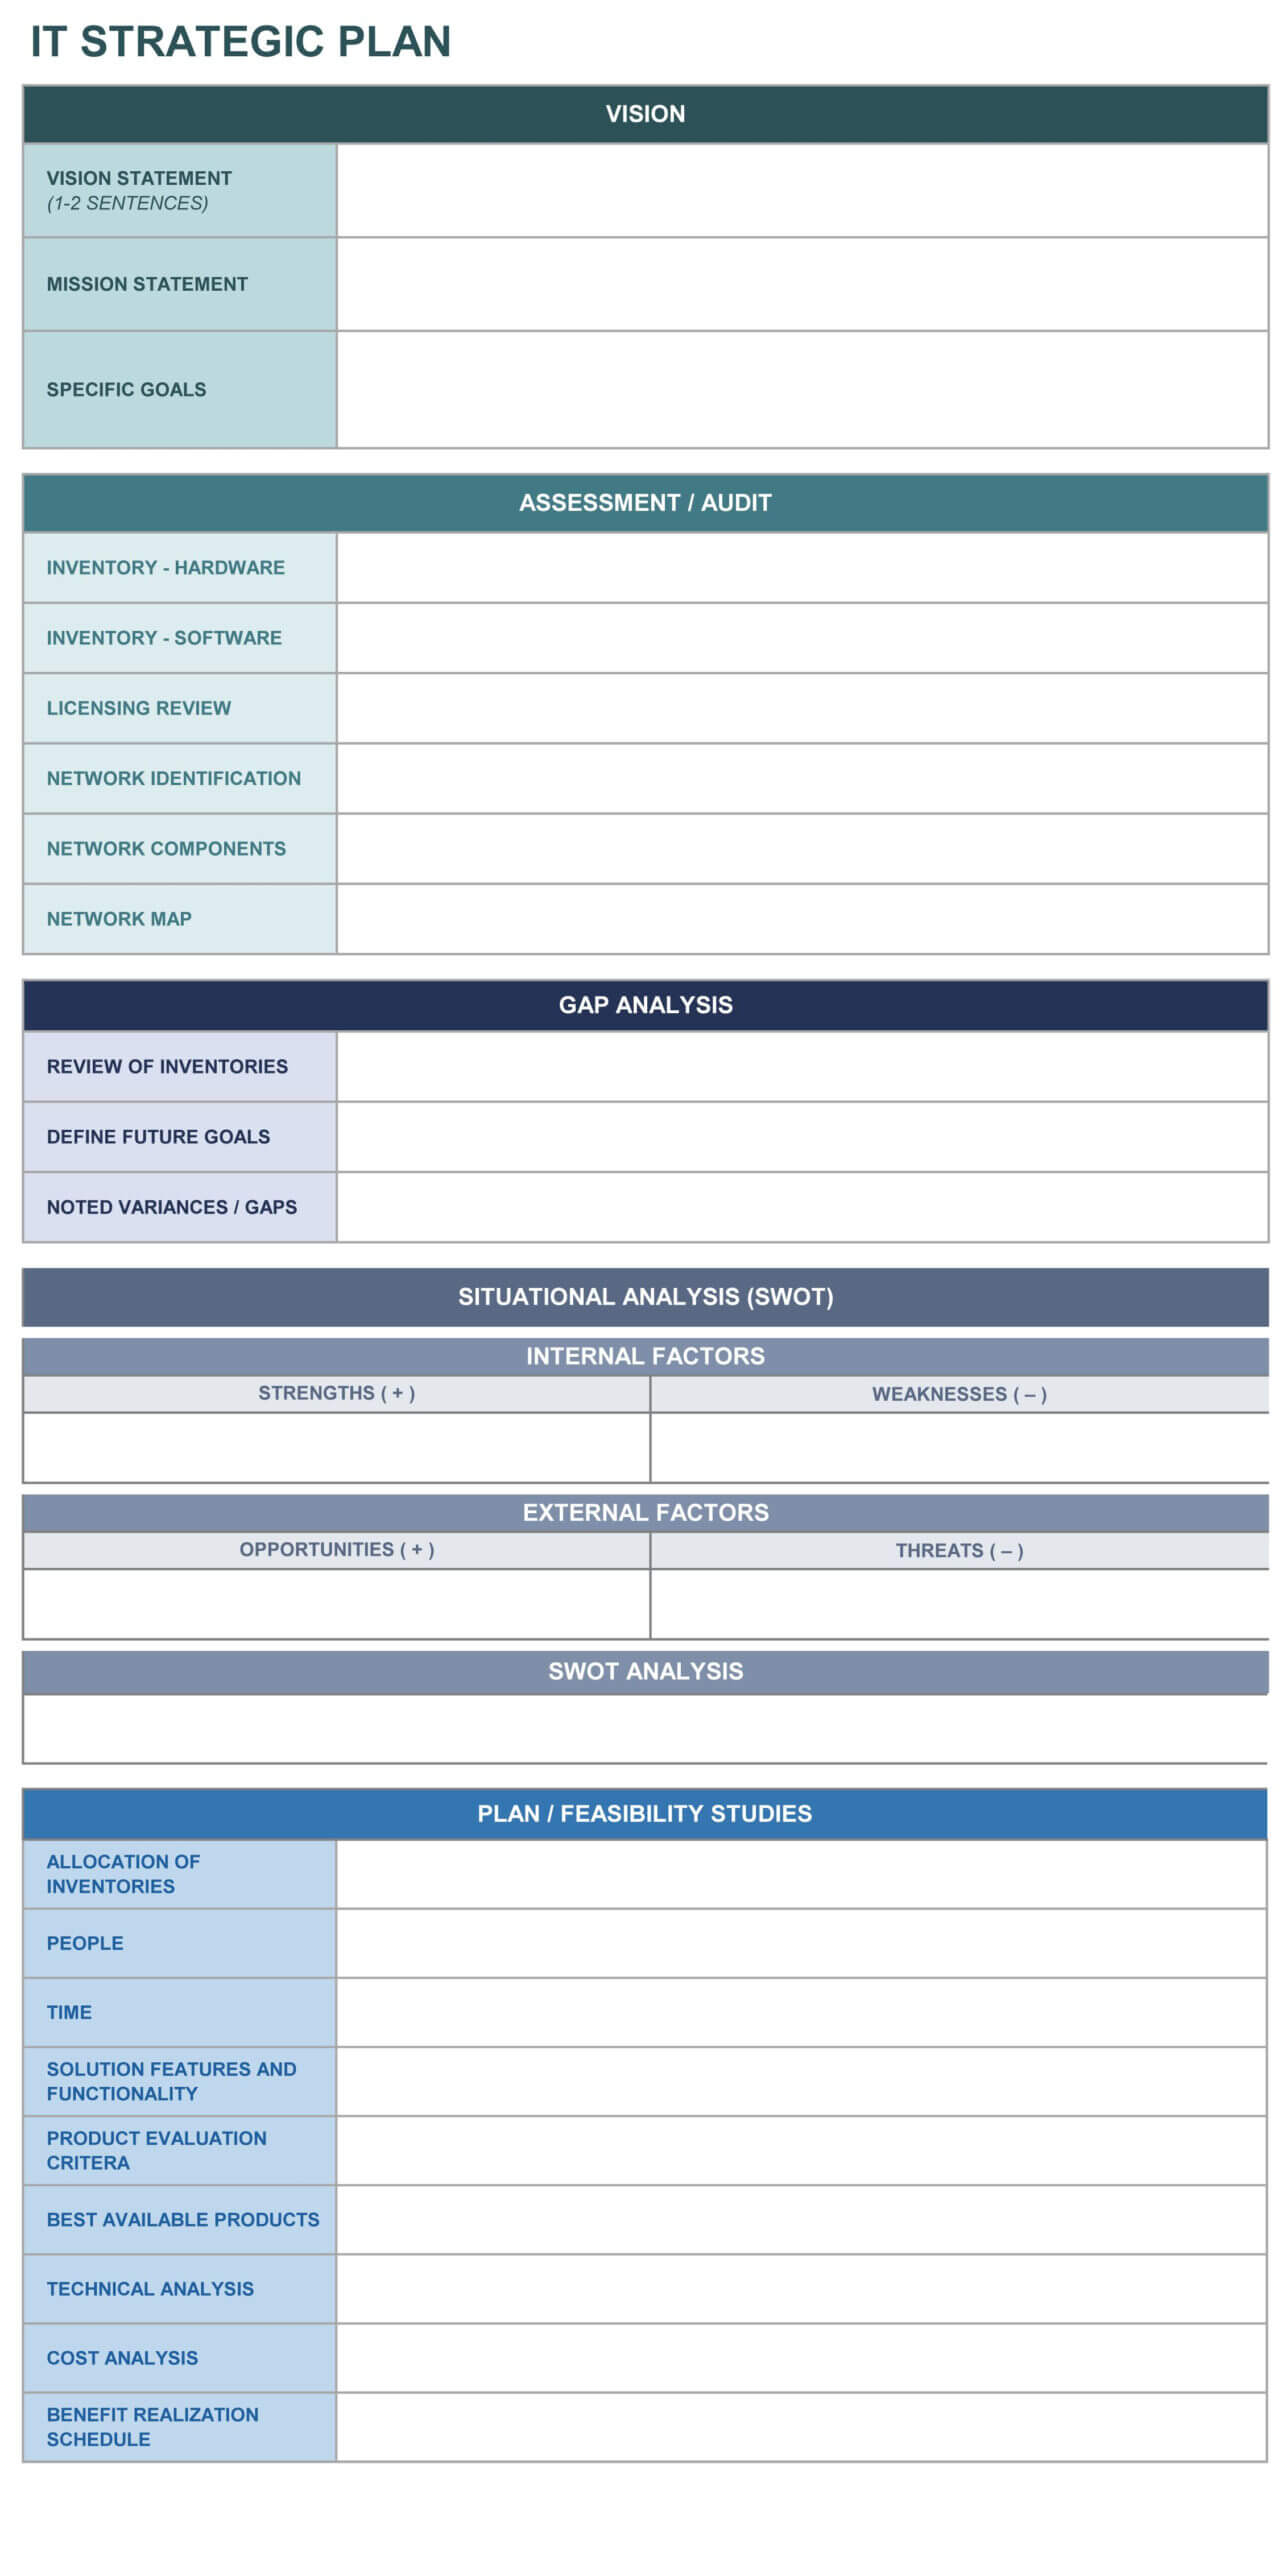 It Strategic Plan Excel Template | Strategic Planning Intended For Gap Analysis Report Template Free